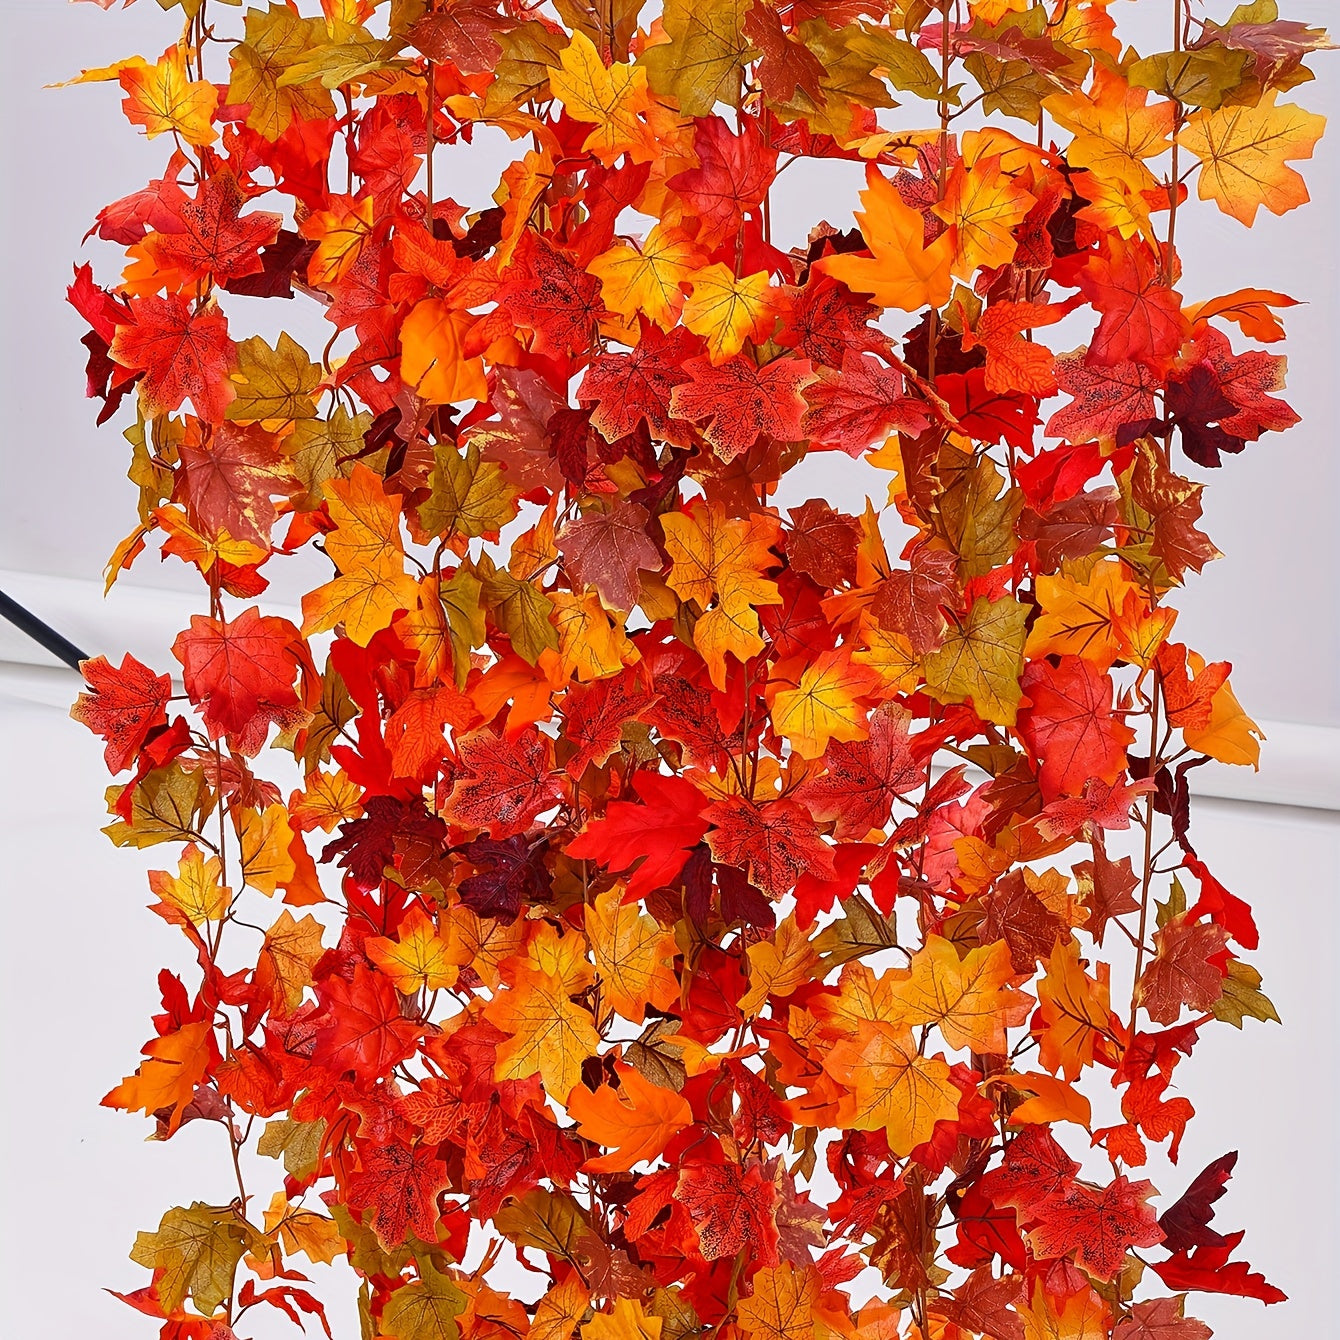 1pc Artificial Fall Maple Leaf Garland, Simulation Autumn Leaves Garland For Thanksgiving Halloween Maple Syrup Festivals Wedding (66.93inch)